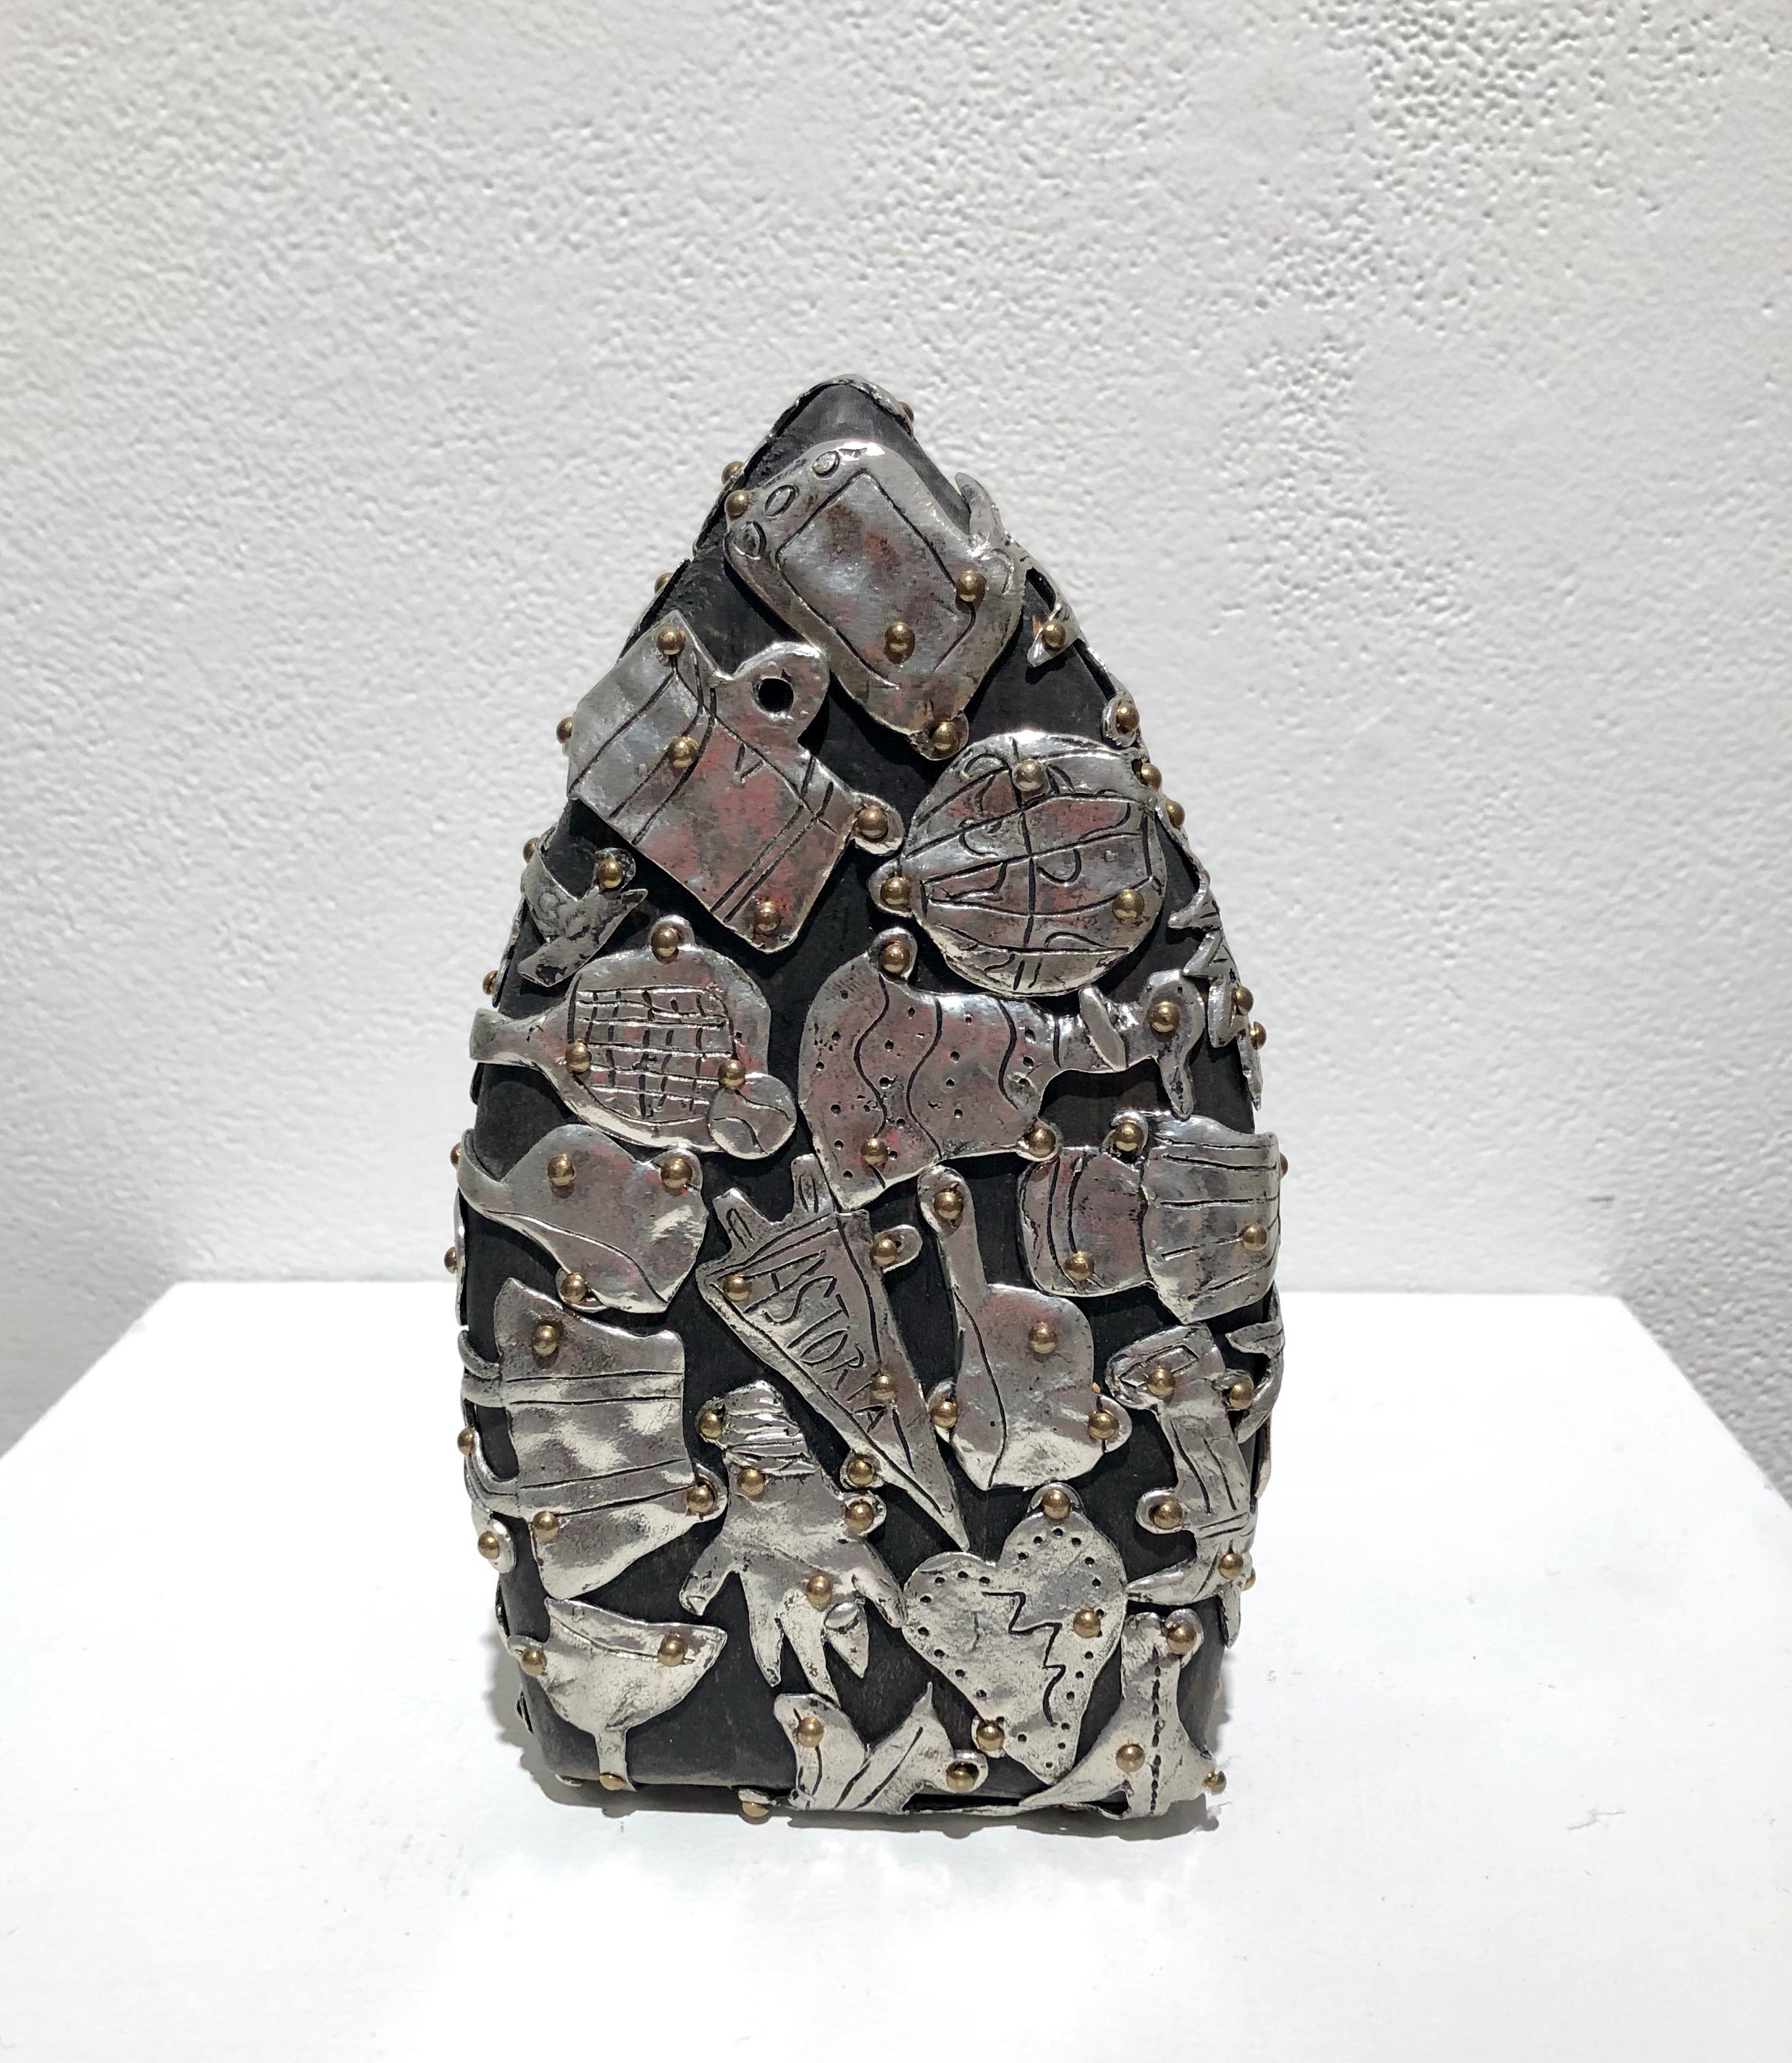  Iron, small scale sculpture in pewter and wood, with Female Fetishes - Outsider Art Art by Claudia DeMonte